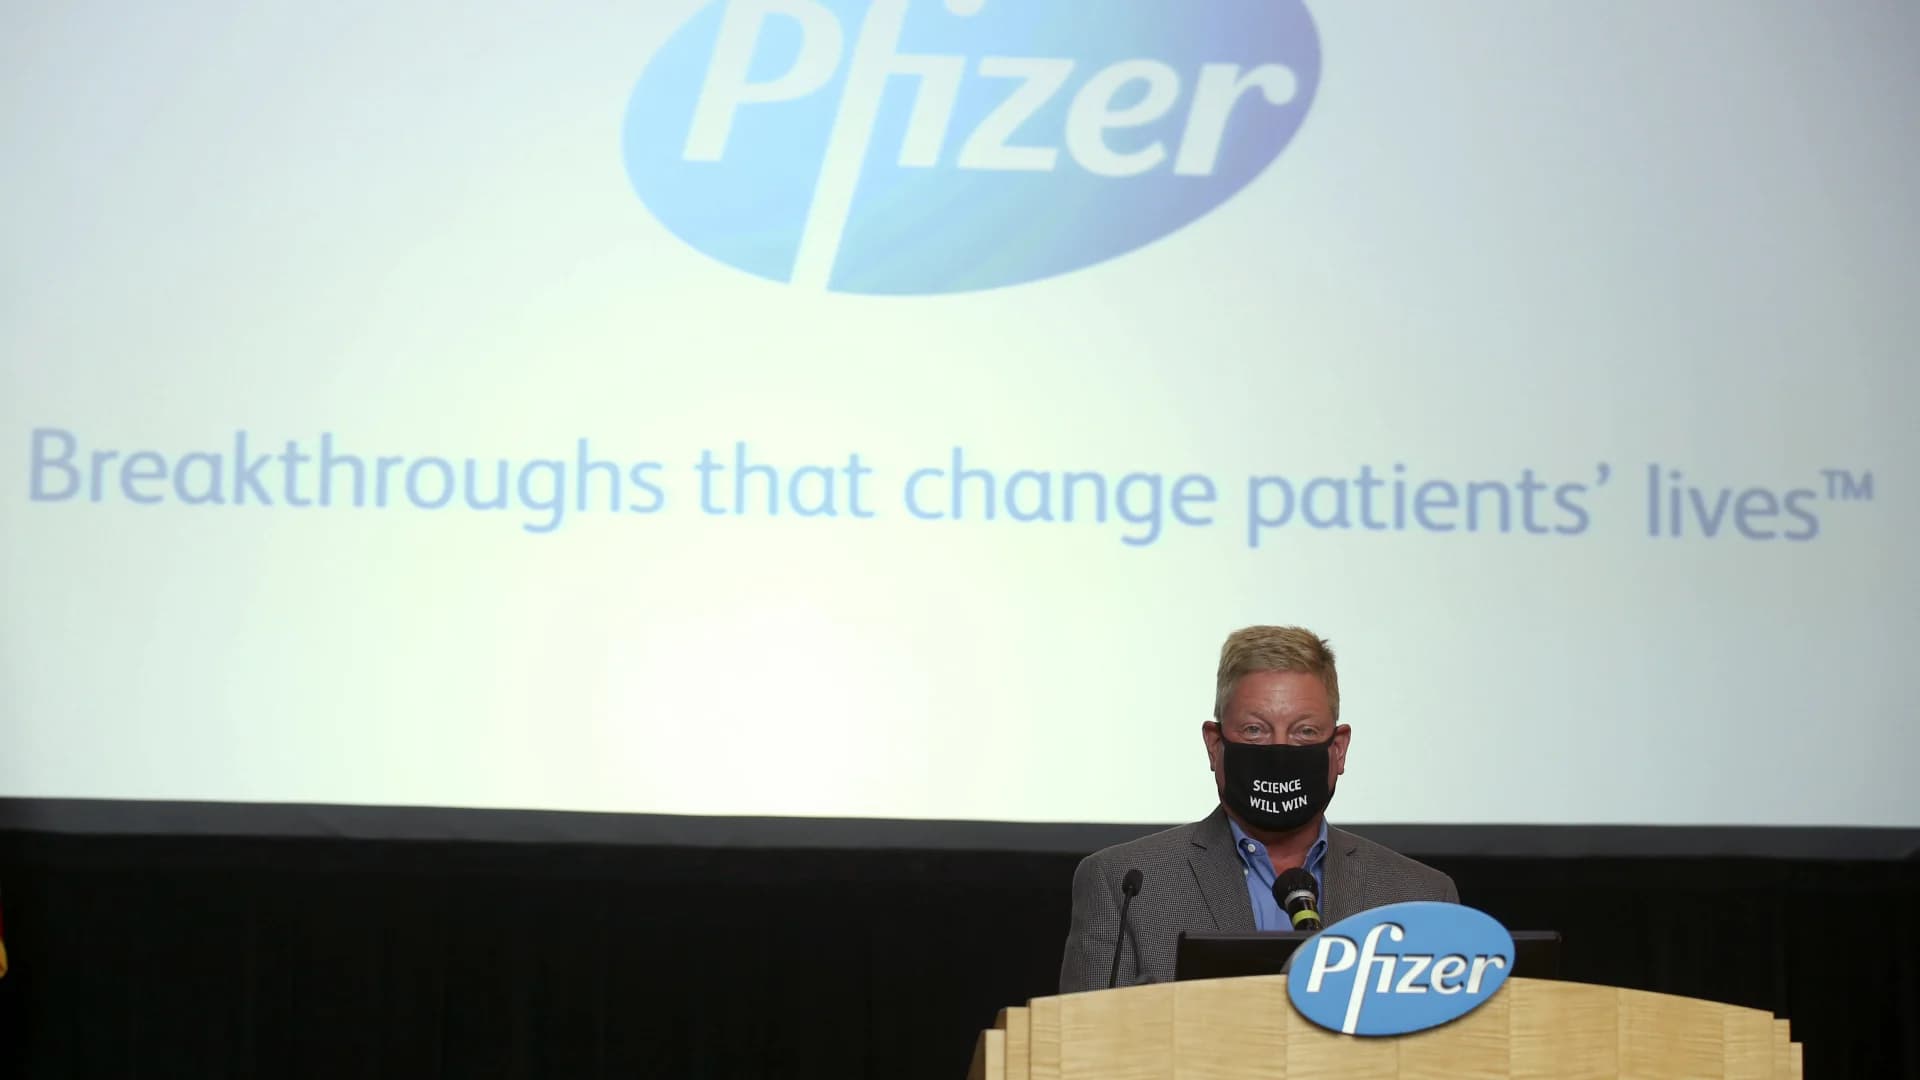 Pfizer set to ship 6.5 million doses of vaccines once approved